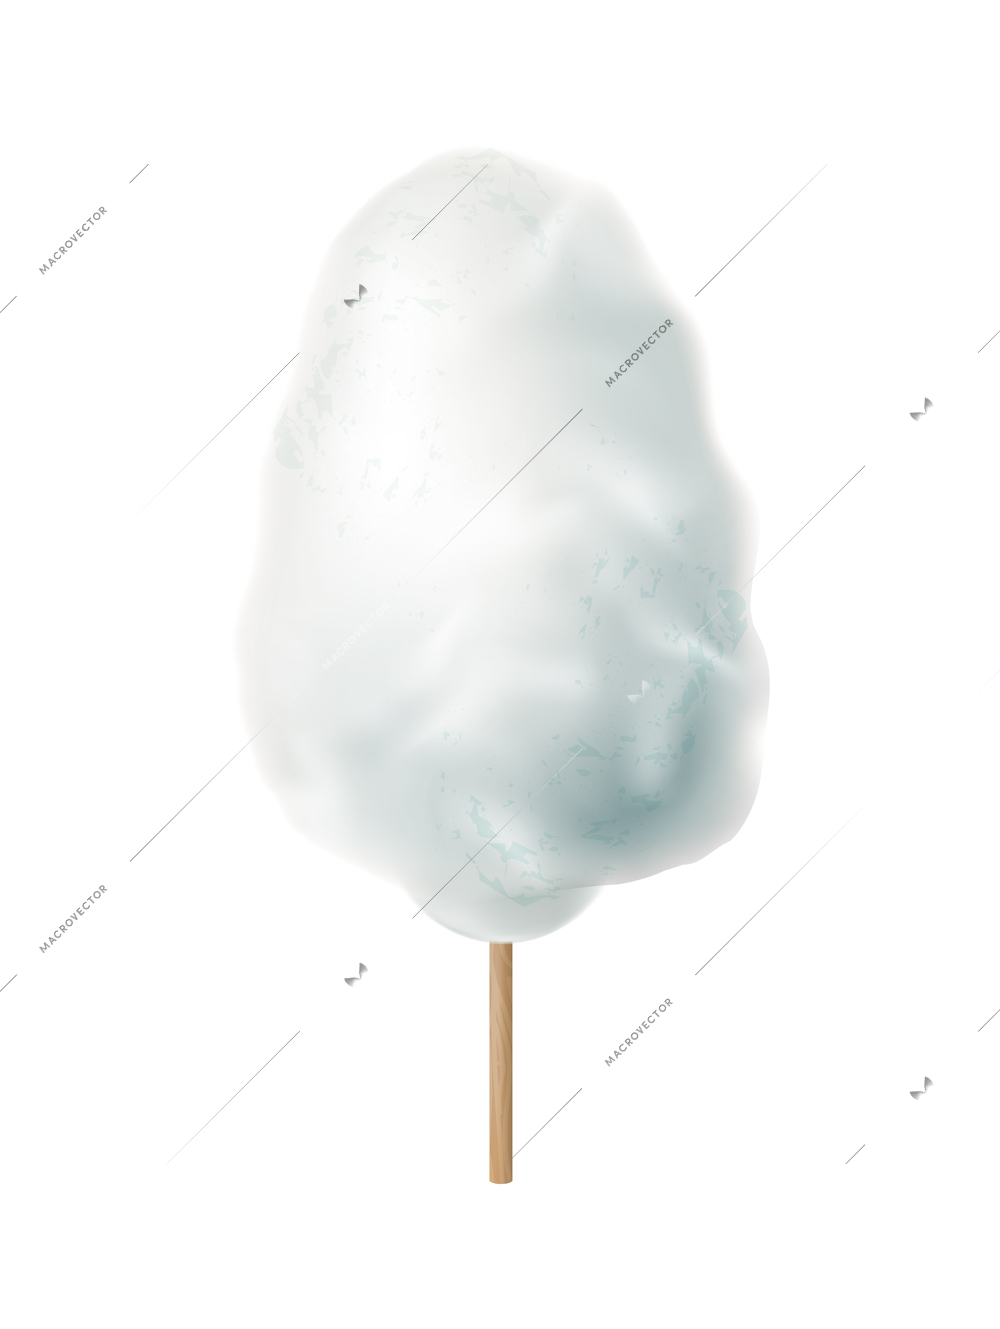 Realistic candy sugar cotton composition with isolated image of colorful confectionery candyfloss stick vector illustration